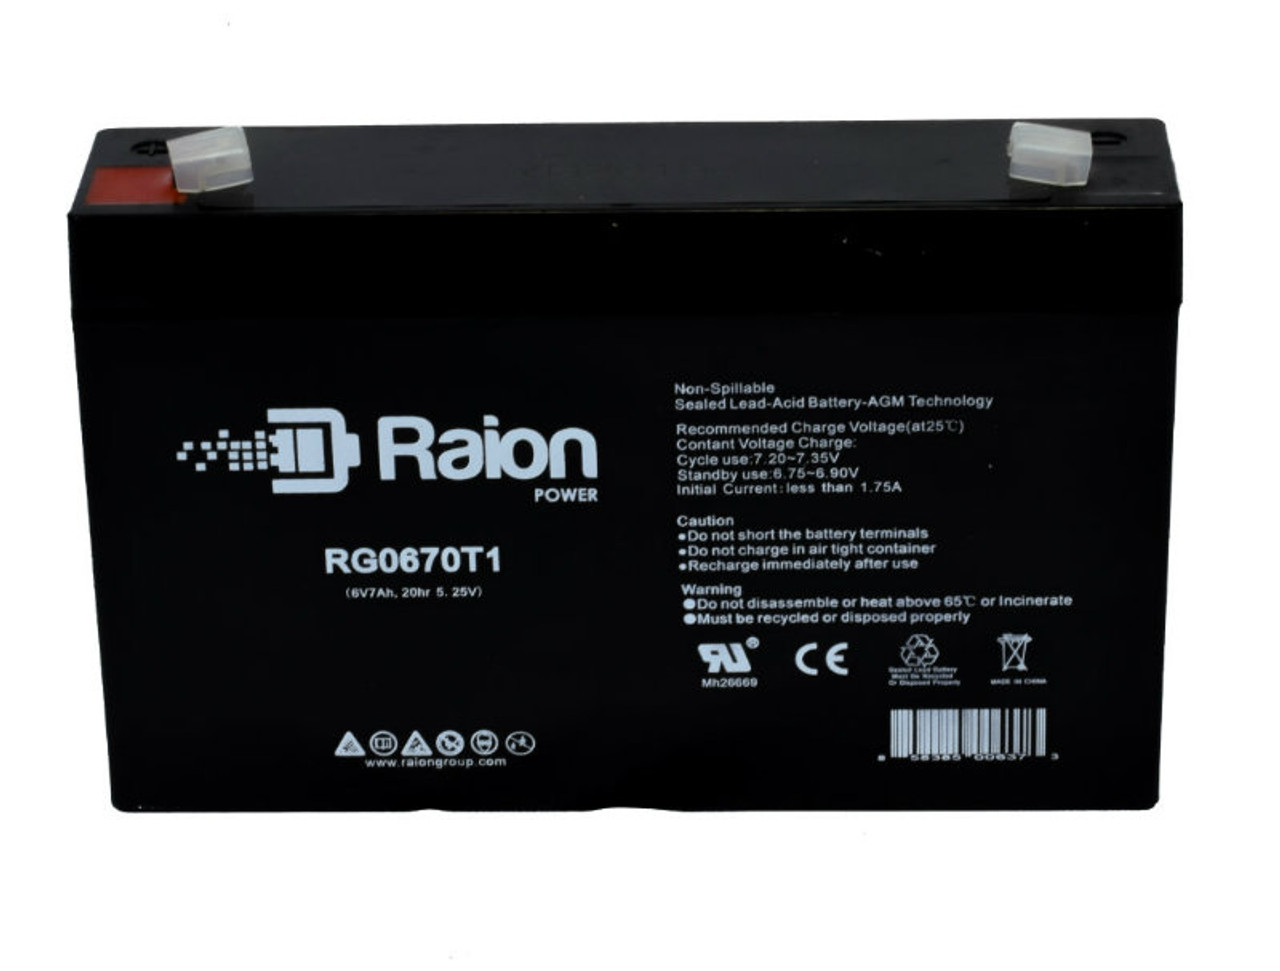 Raion Power RG0670T1 Replacement Battery Cartridge for Baxter Healthcare TRAVACARE Infusion